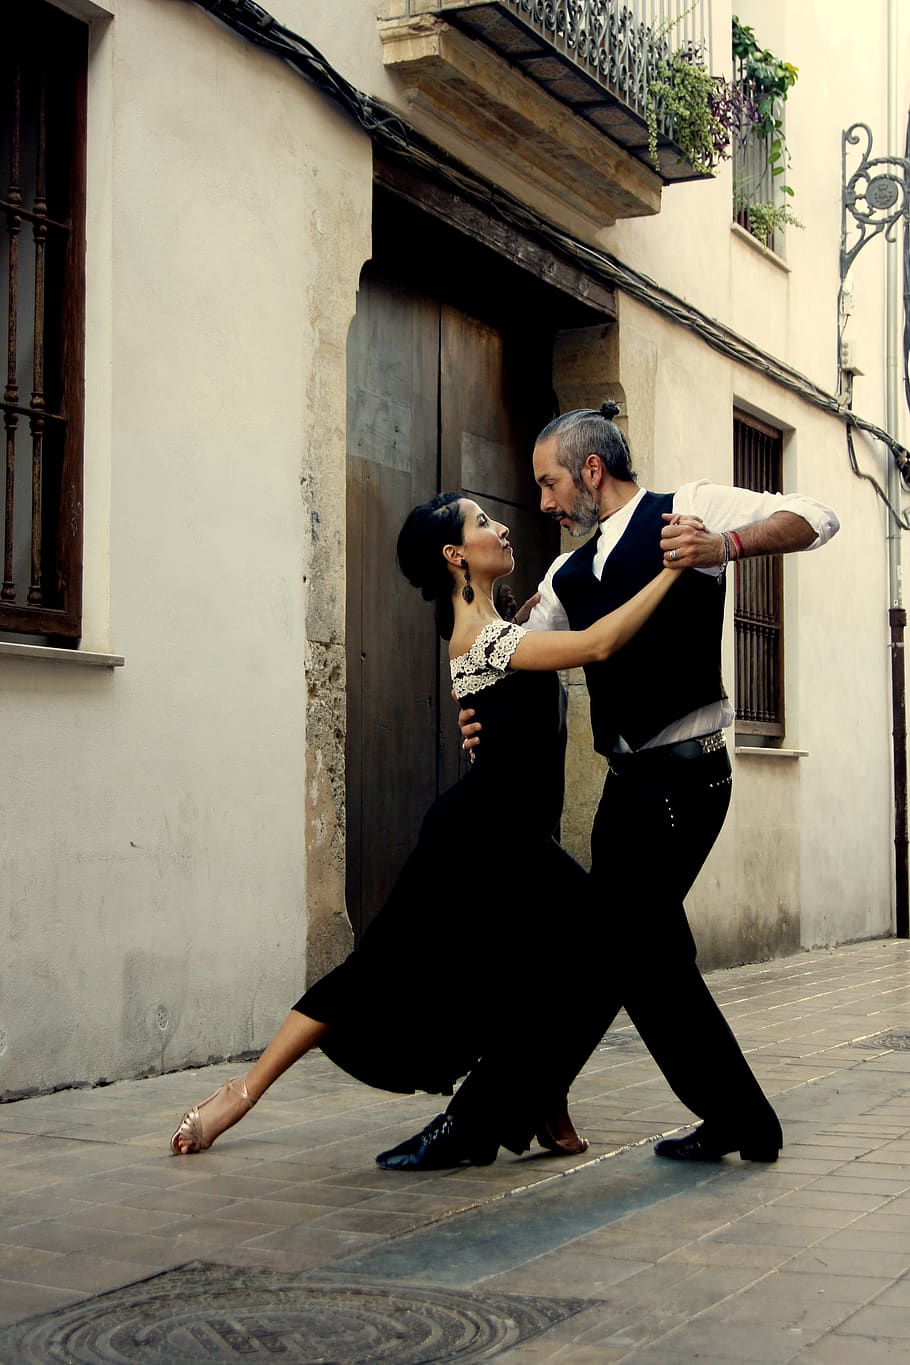 tango, couple, dancer, dancers, romance, full length, real people, two people, architecture, built structure